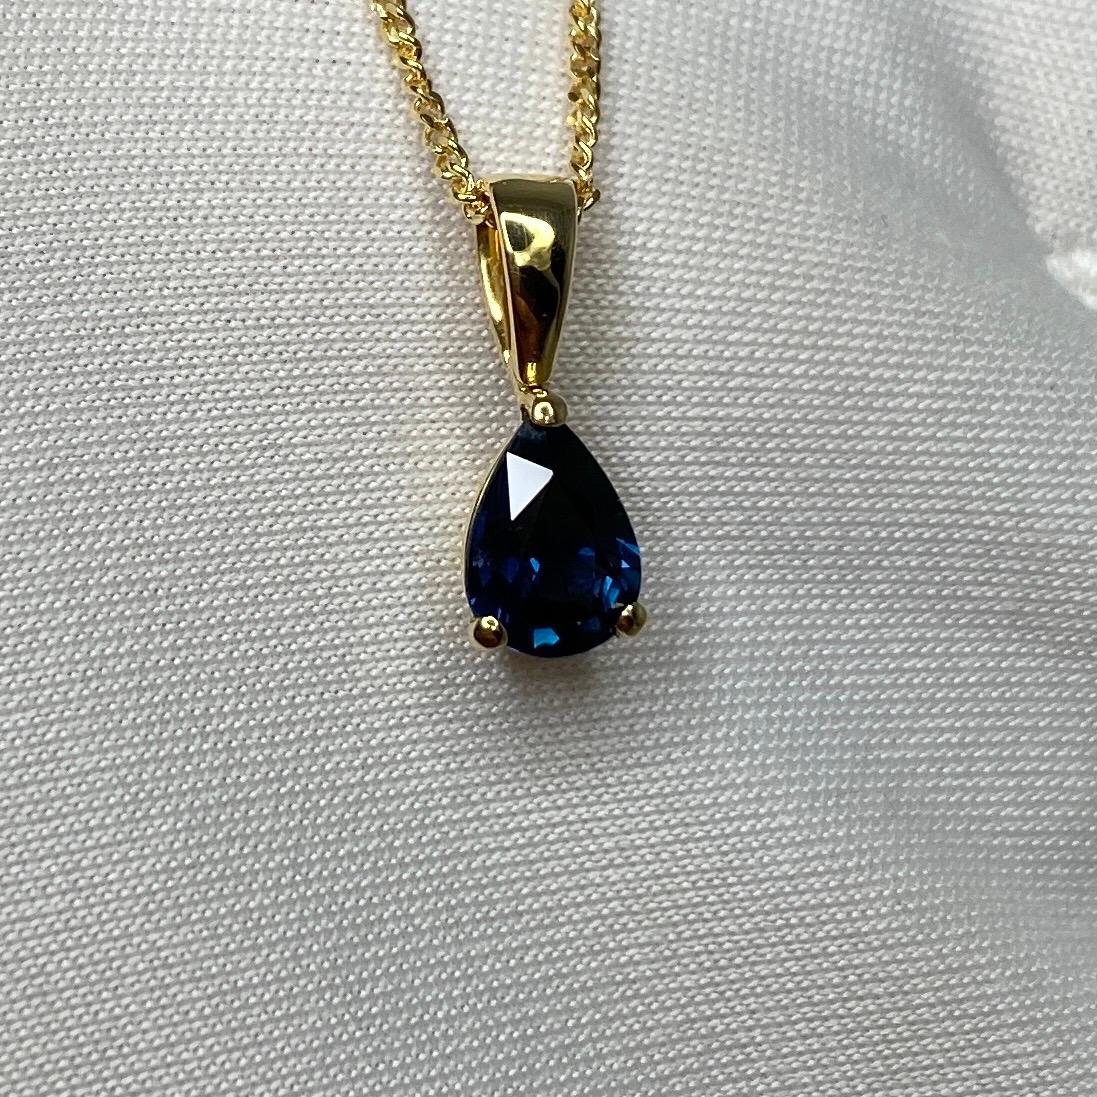 Fine IGI Certified Untreated Deep Blue Sapphire Pear Cut 18k Yellow Gold Pendant Necklace.

Untreated 0.81 Carat oval cut sapphire with a stunning deep blue colour and excellent clarity. A very clean stone.

This sapphire also has an excellent pear